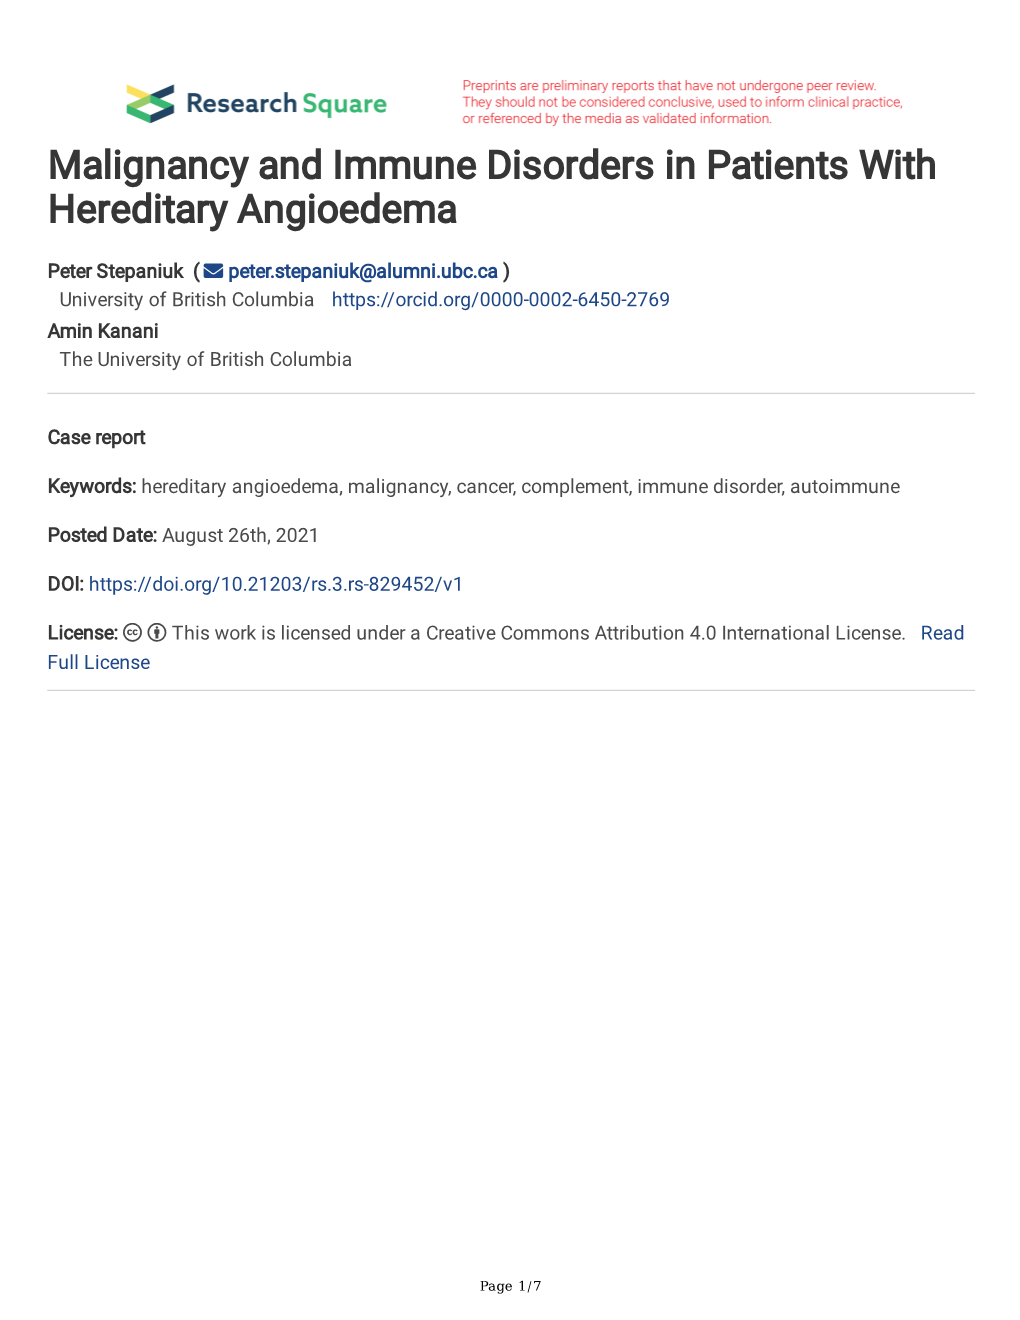 Malignancy and Immune Disorders in Patients with Hereditary Angioedema